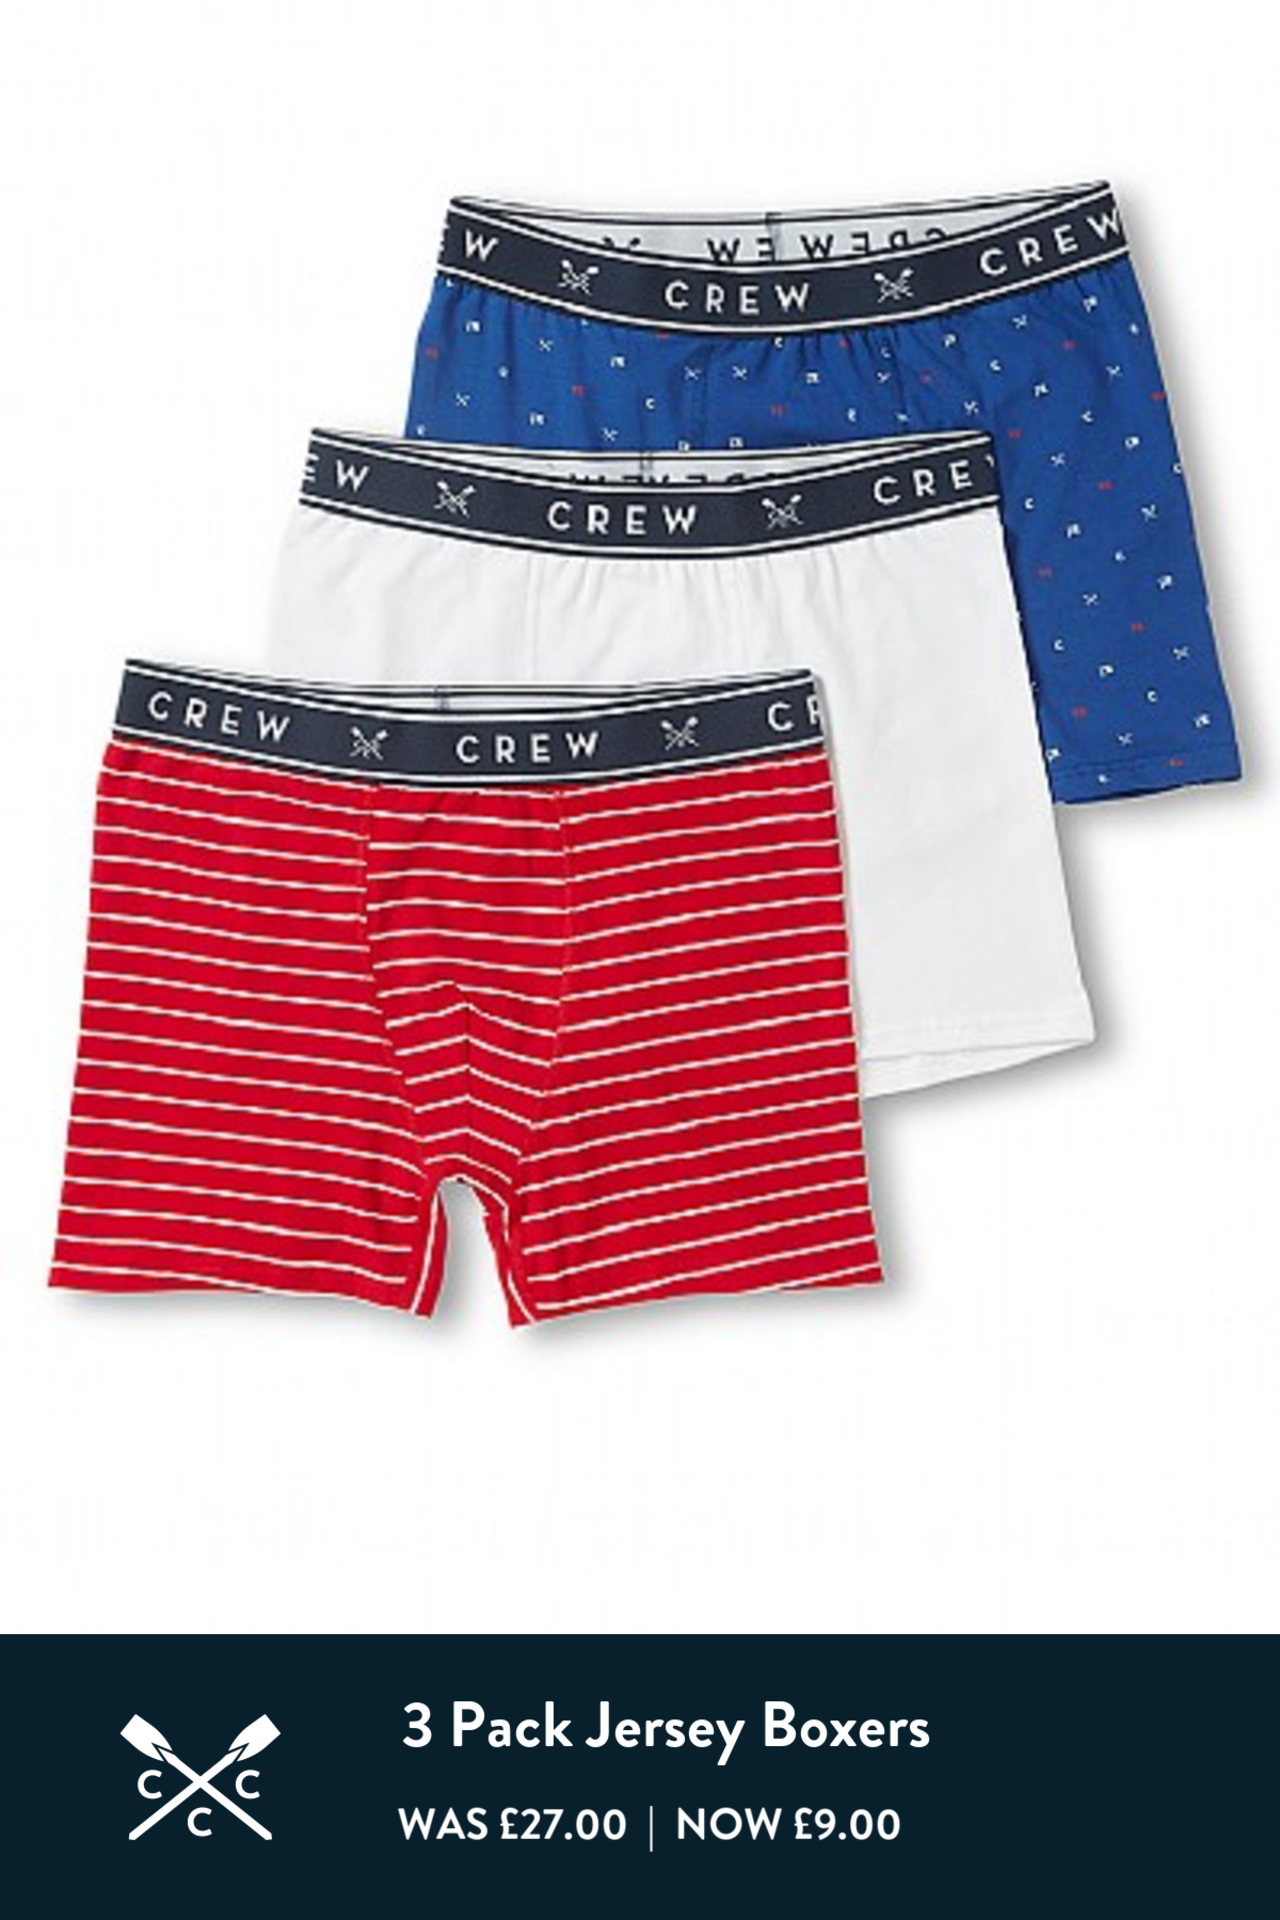 3 X BRAND NEW PACKS OF 3 CGREW CLOTHING BOXER SHORTS SIZE SMALL RRP £29 PER PACK - 15